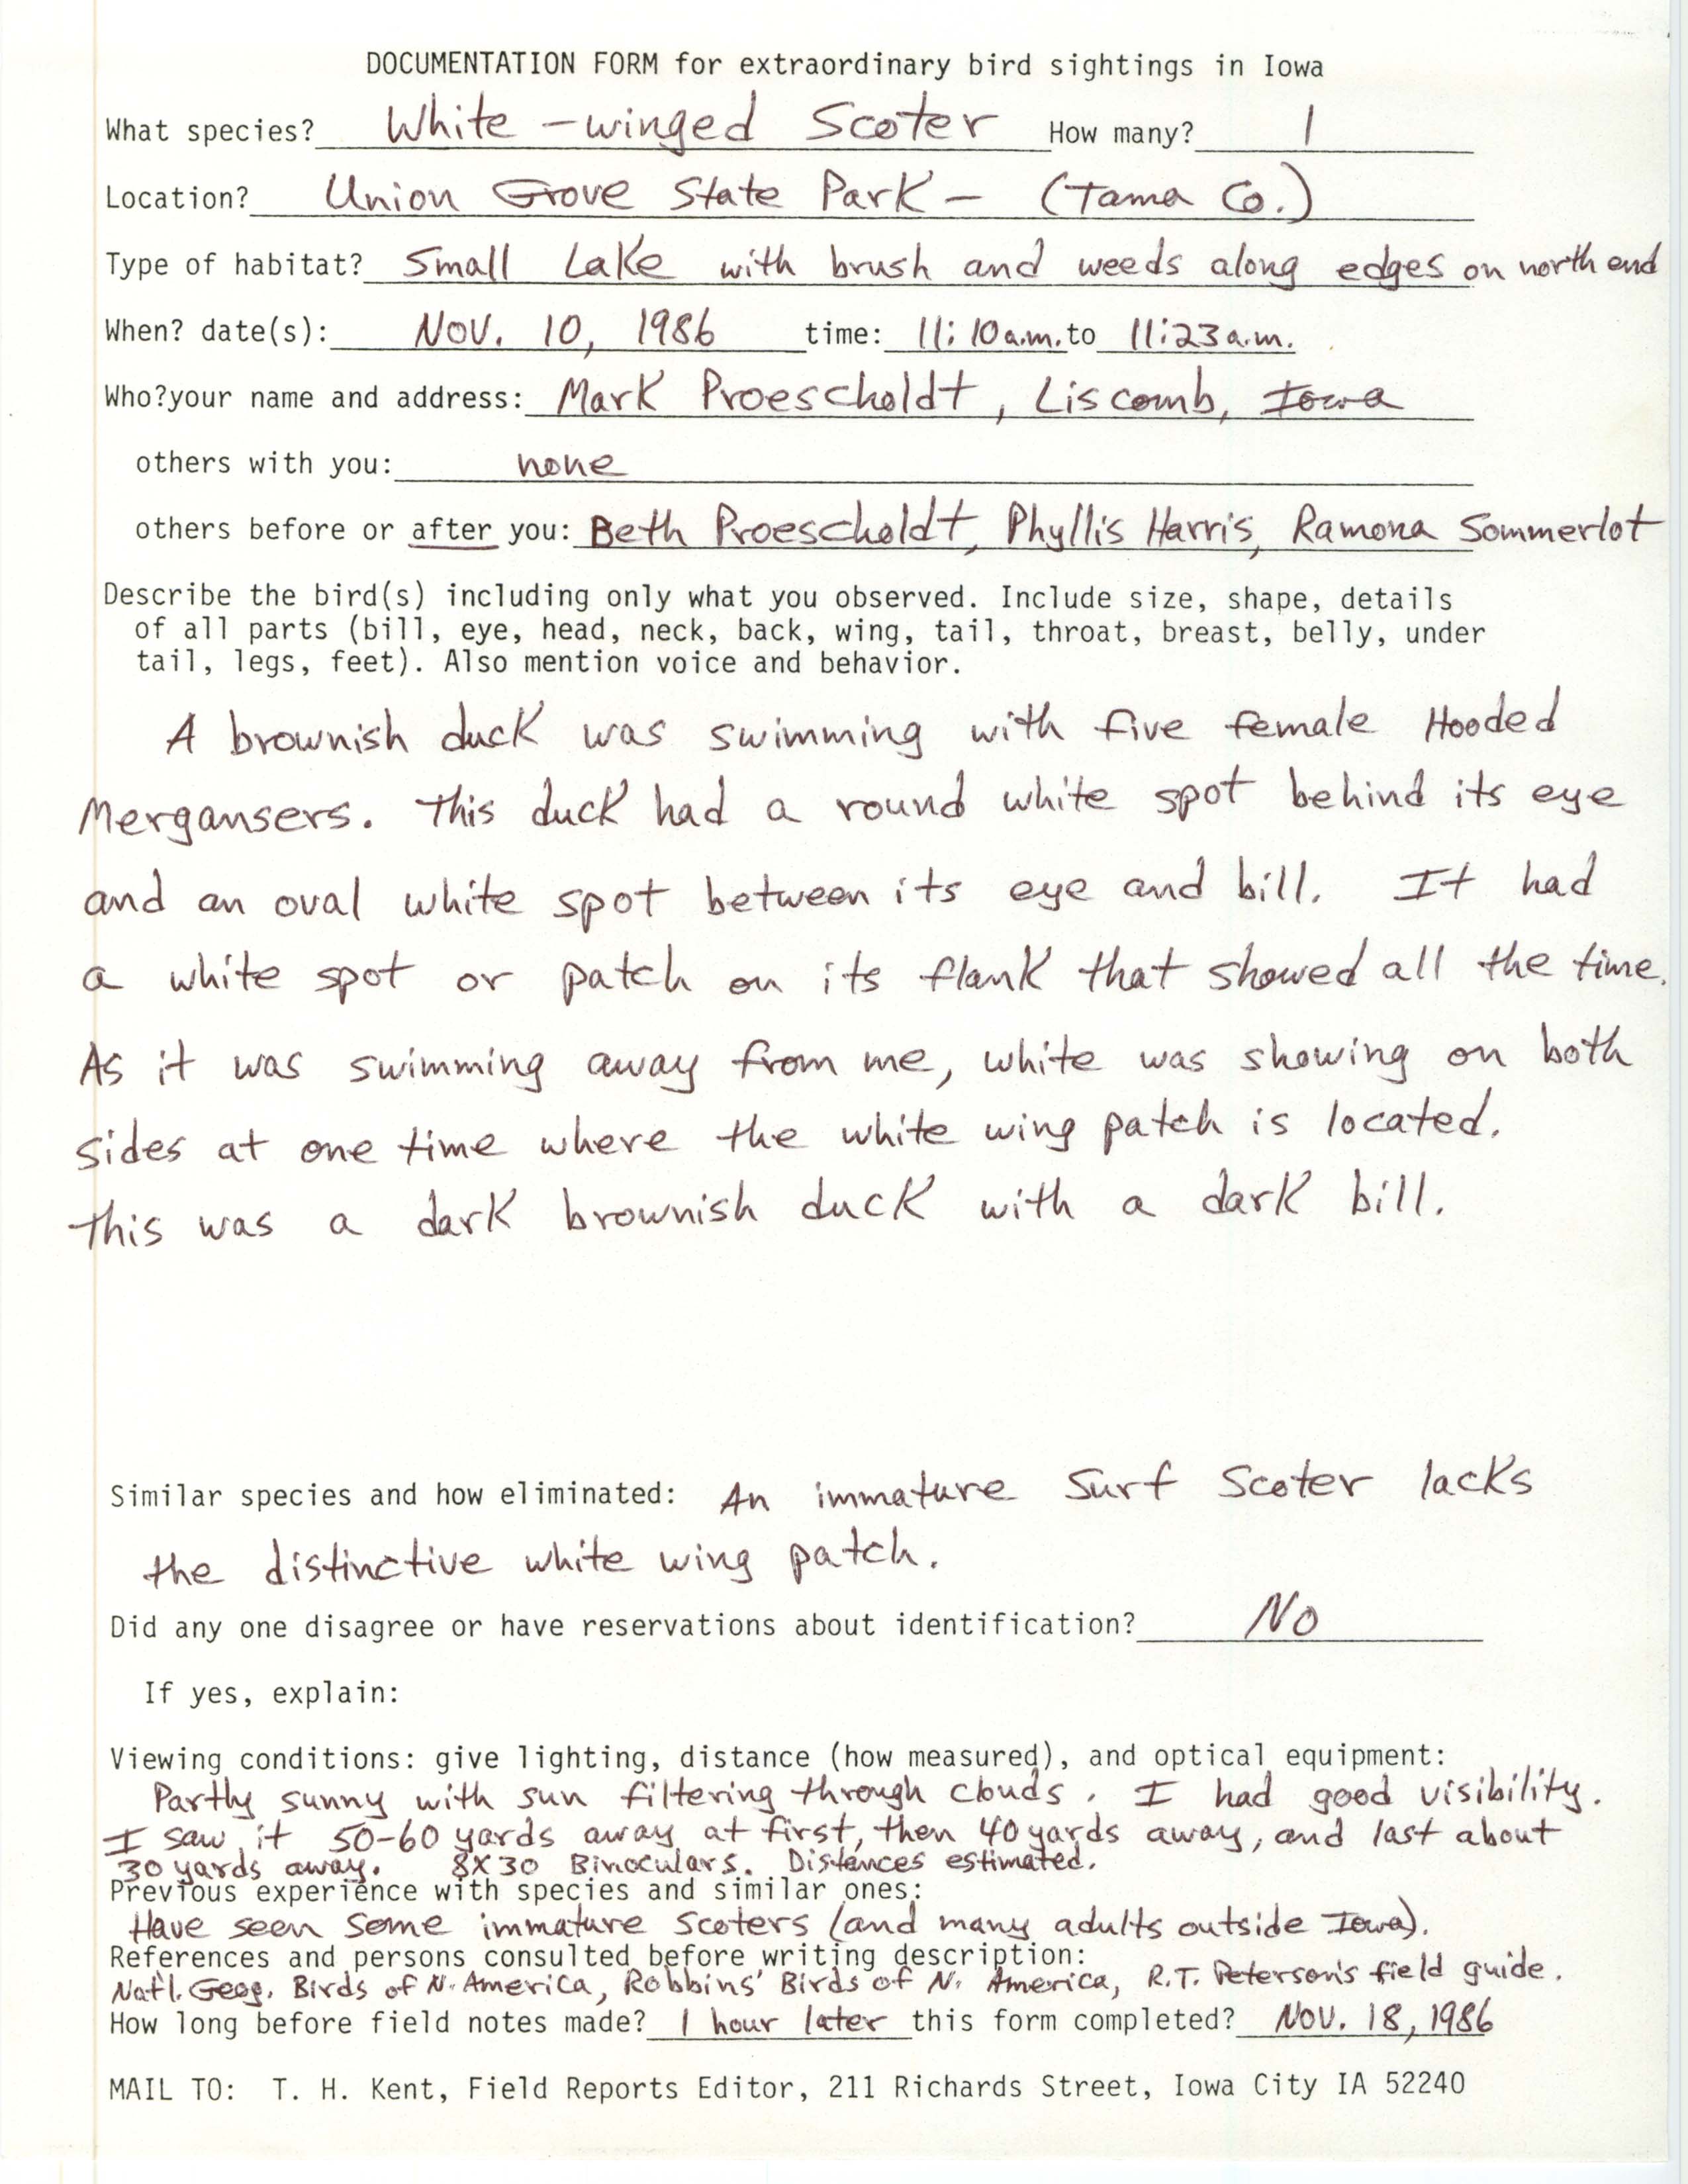 Rare bird documentation form for White-winged Scoter at Union Grove State Park, 1986